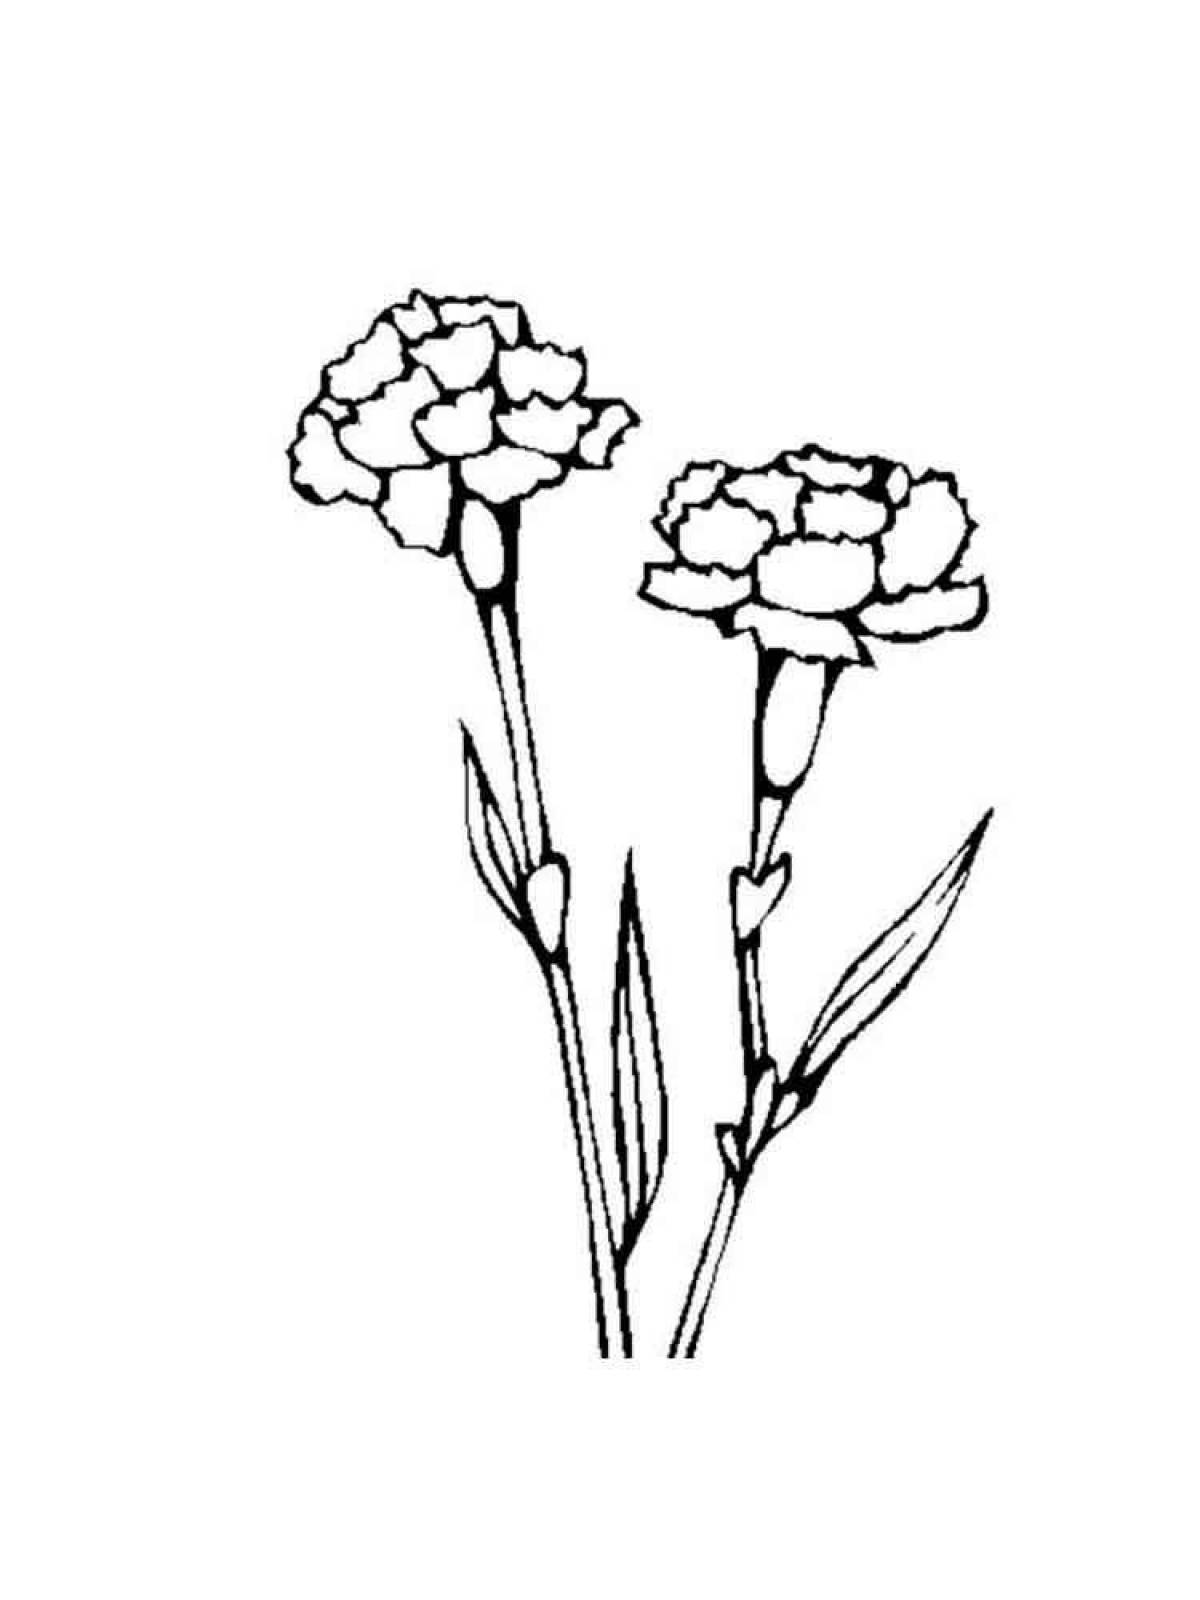 Playful carnation coloring page for kids